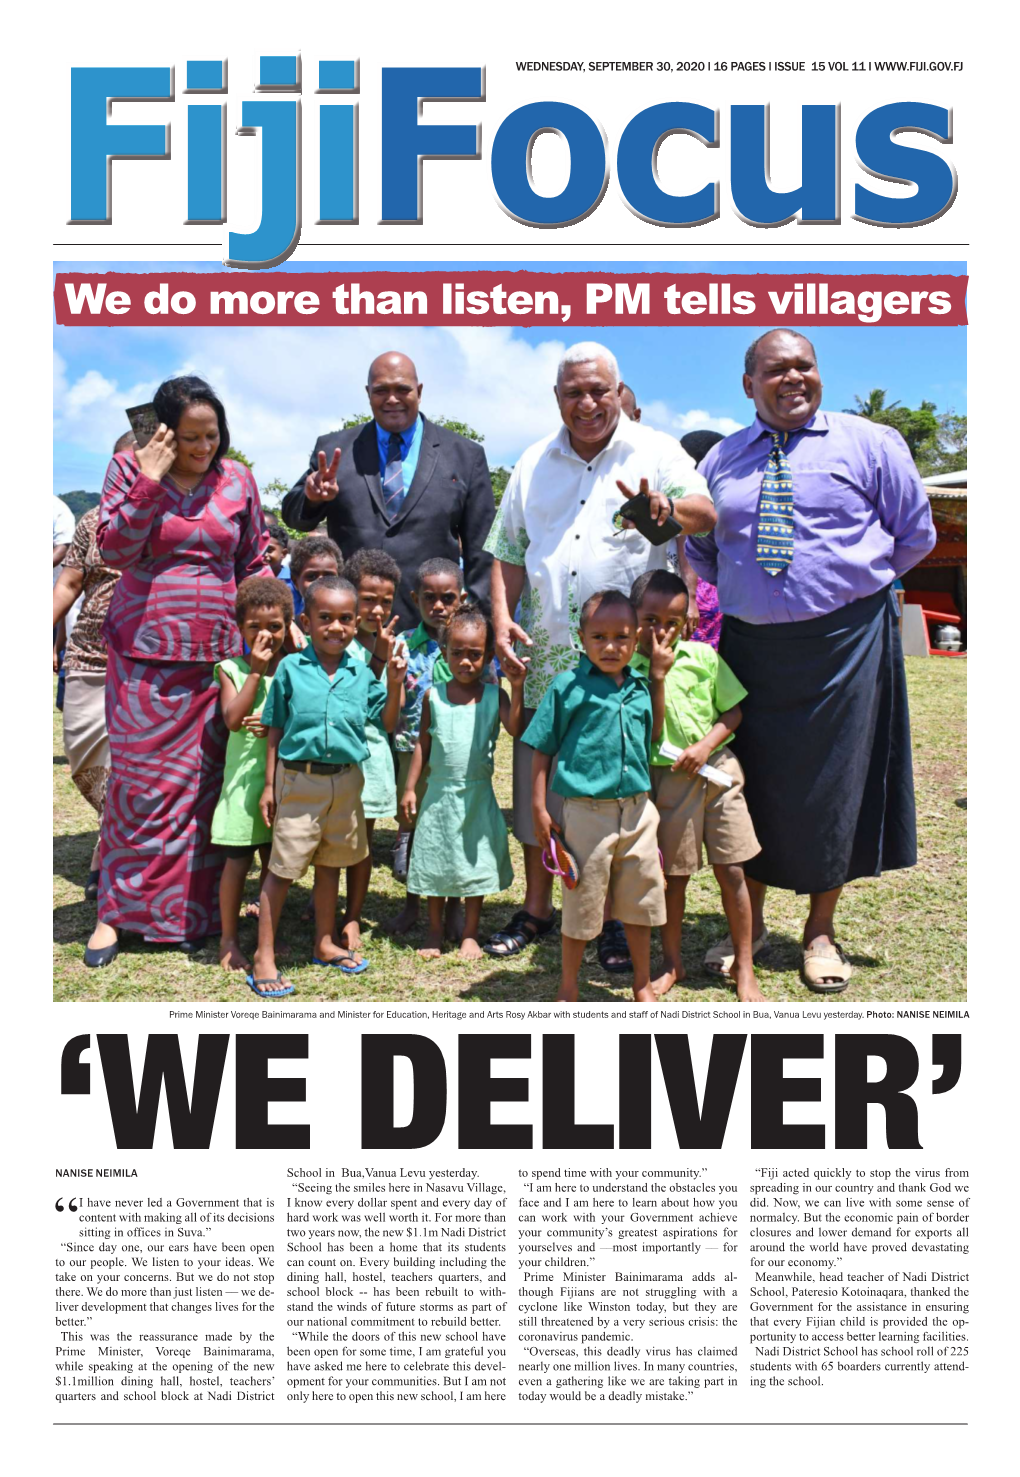 We Do More Than Listen, PM Tells Villagers